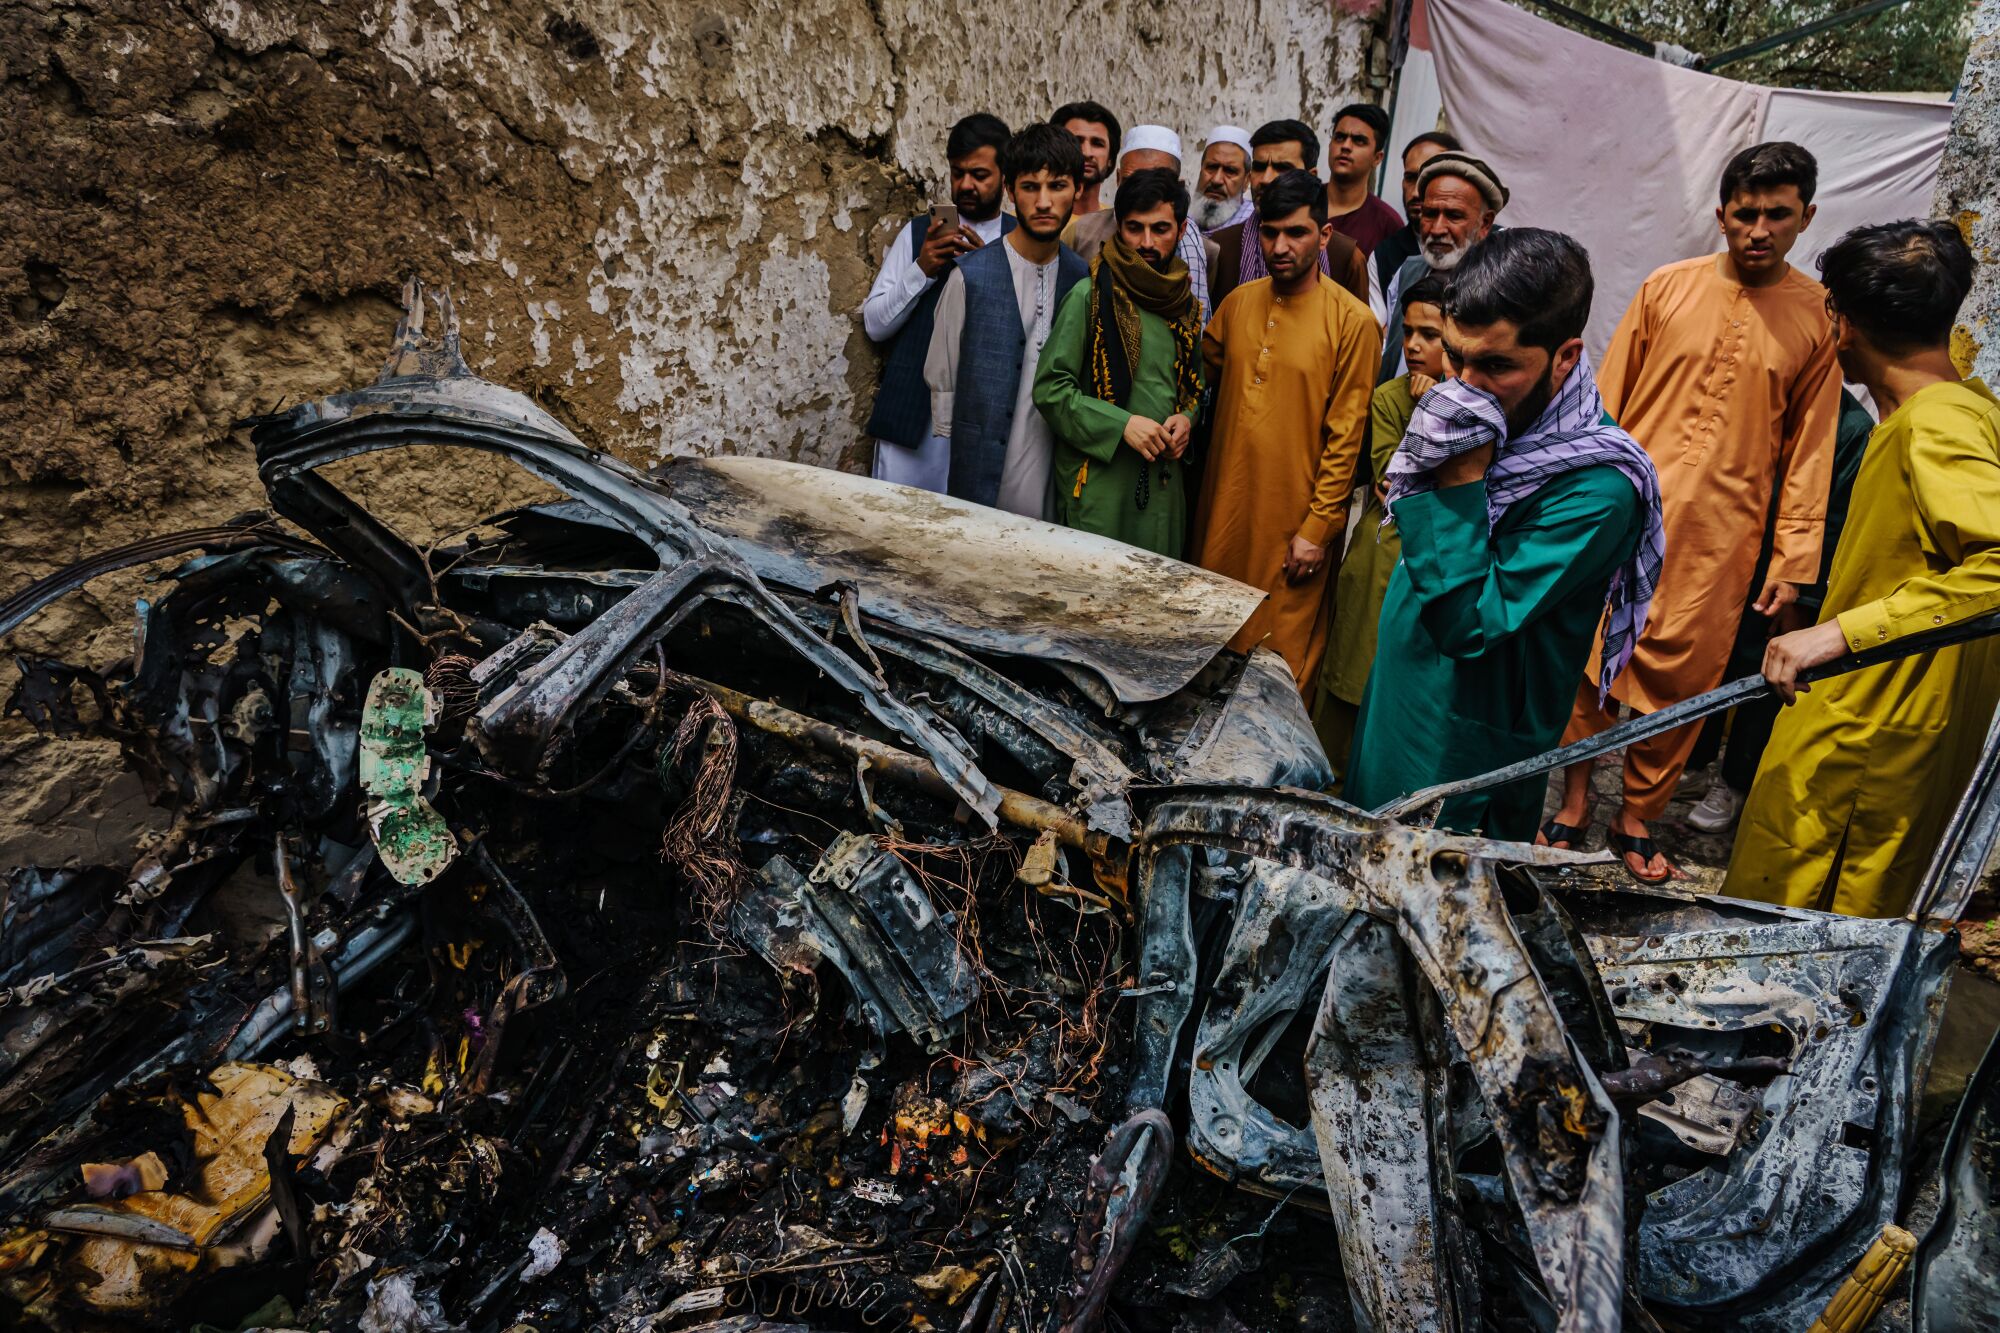 Relatives and neighbors of the Ahmadi family gather around the incinerated vehicle 